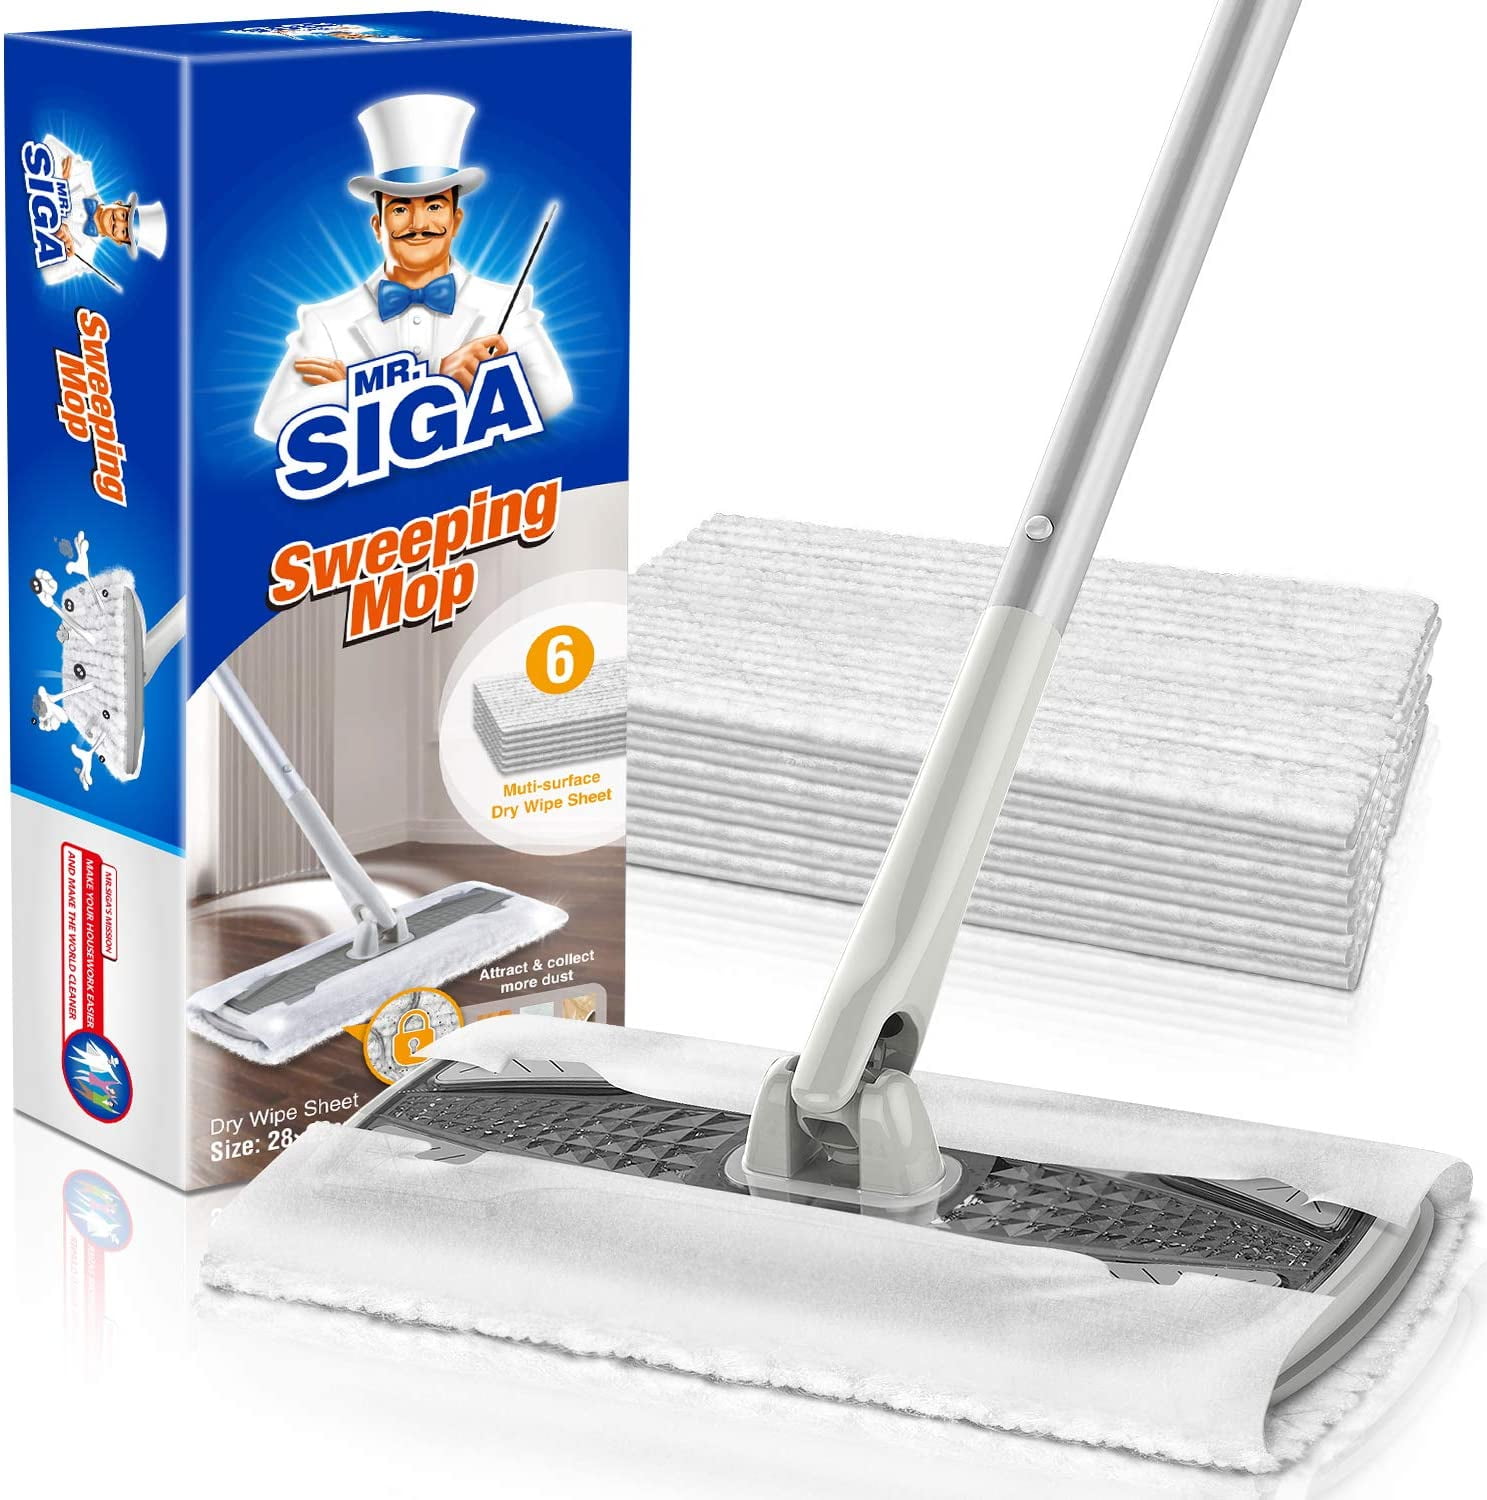 MR.Siga Professional Household Floor Dry Sweeping Mop,6 Microfiber Dry  Sweeping Cloths Included